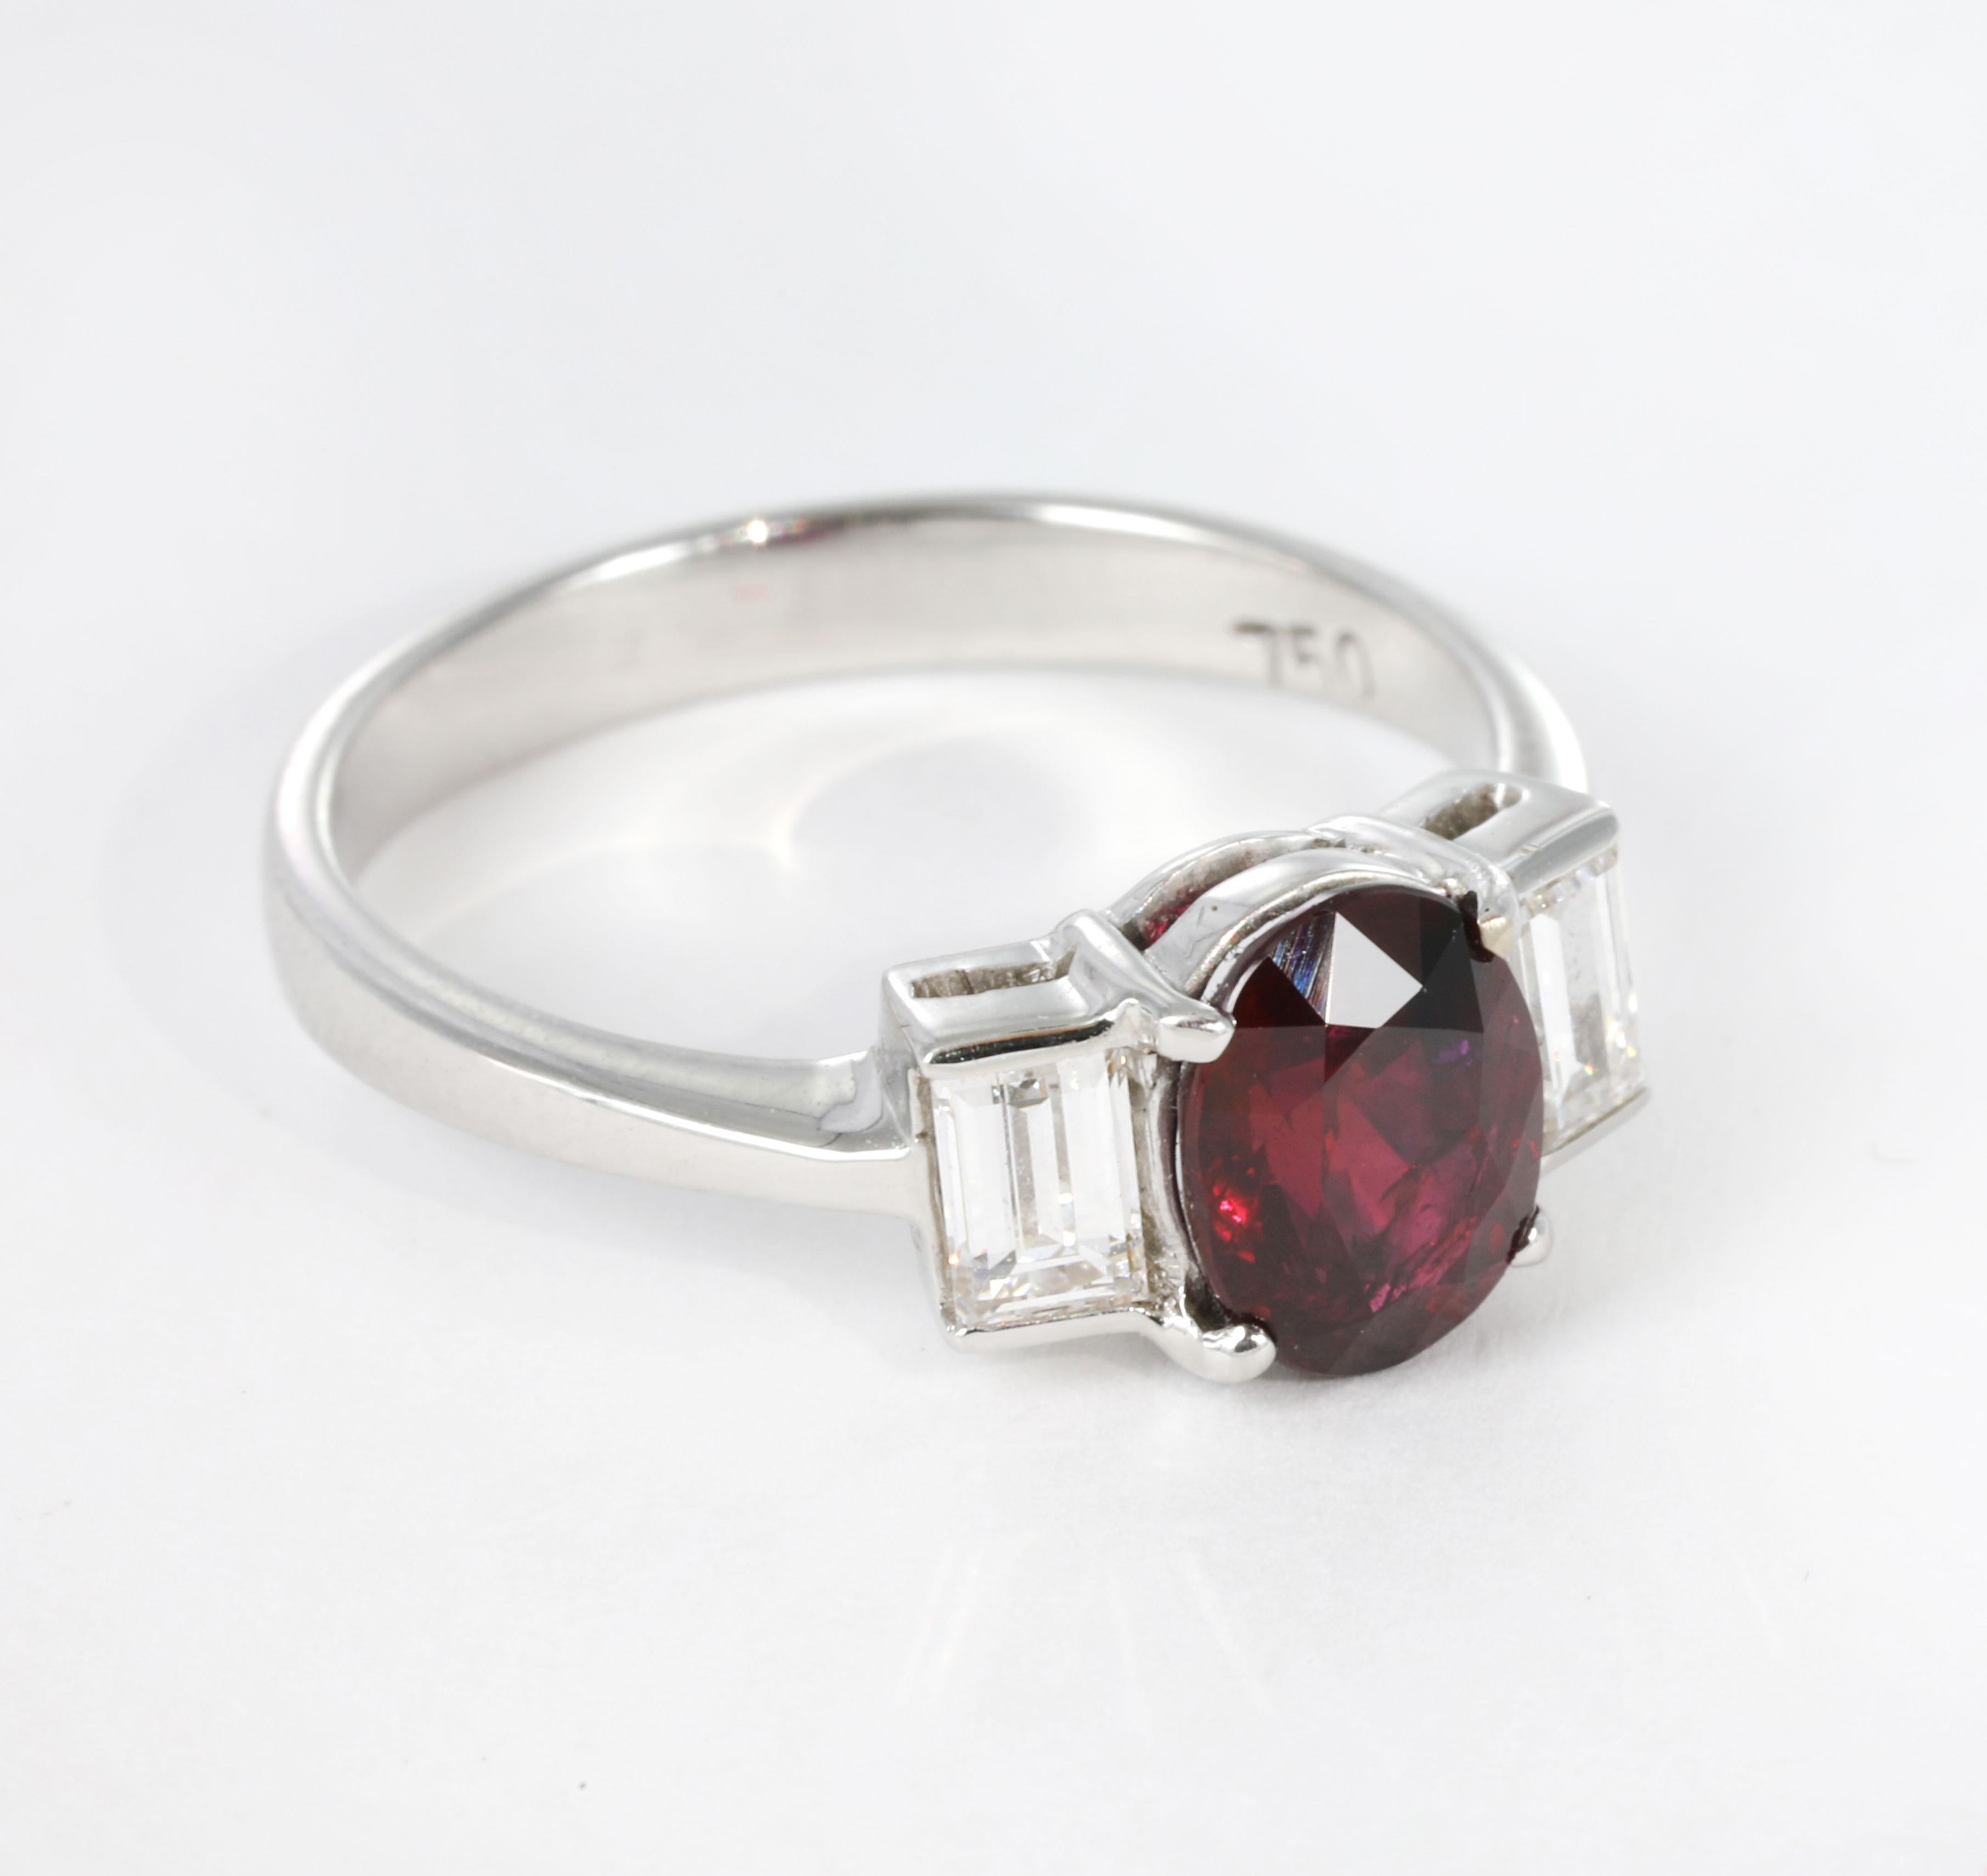 Women's Unheated 1.54 Carat “Pigeon’s Blood” Ruby & Diamond 18K Gold Ring, GIA Certified For Sale